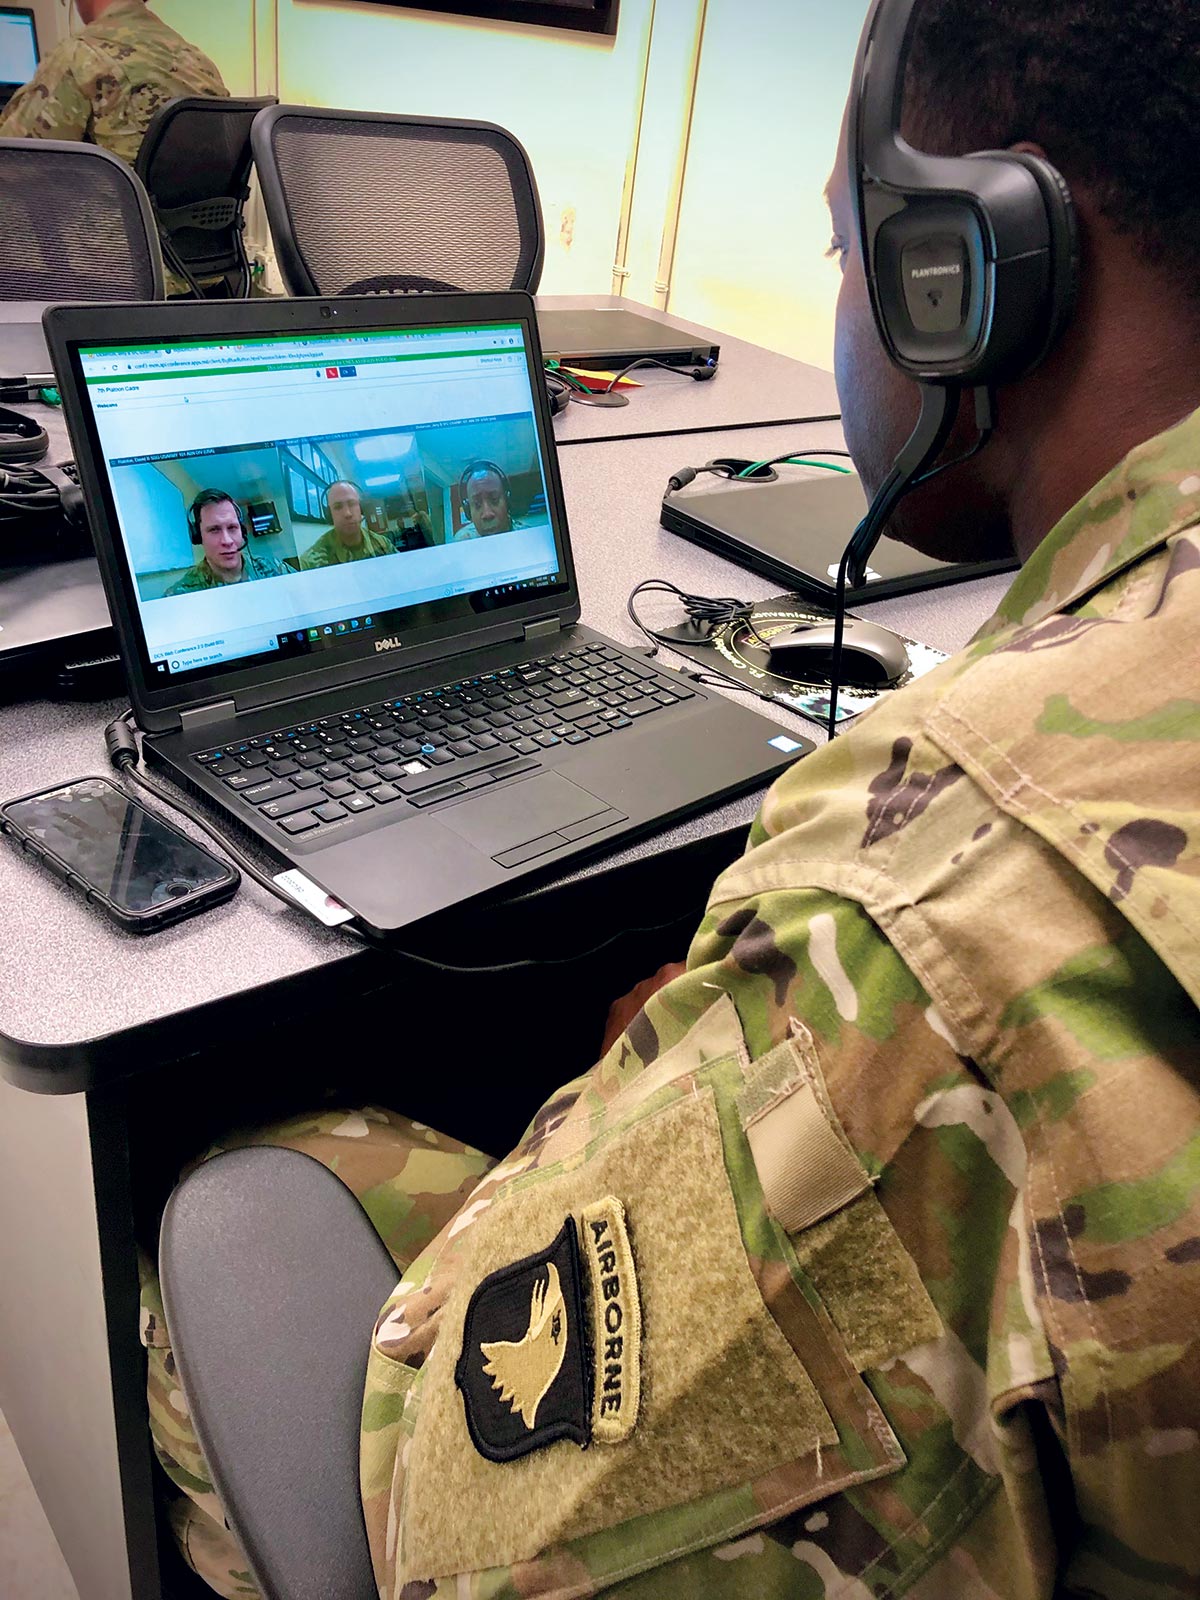 Sgt. 1st Class Jerry Dickerson, a facilitator assigned to the 101st NCO Academy at Fort Campbell, Kentucky, uses the Defense Collaboration Services website to meet with other facilitators 31 March 2020 in preparation for the daily face-to-face time between the facilitators and Basic Leader Course students at Fort Bliss, Texas.